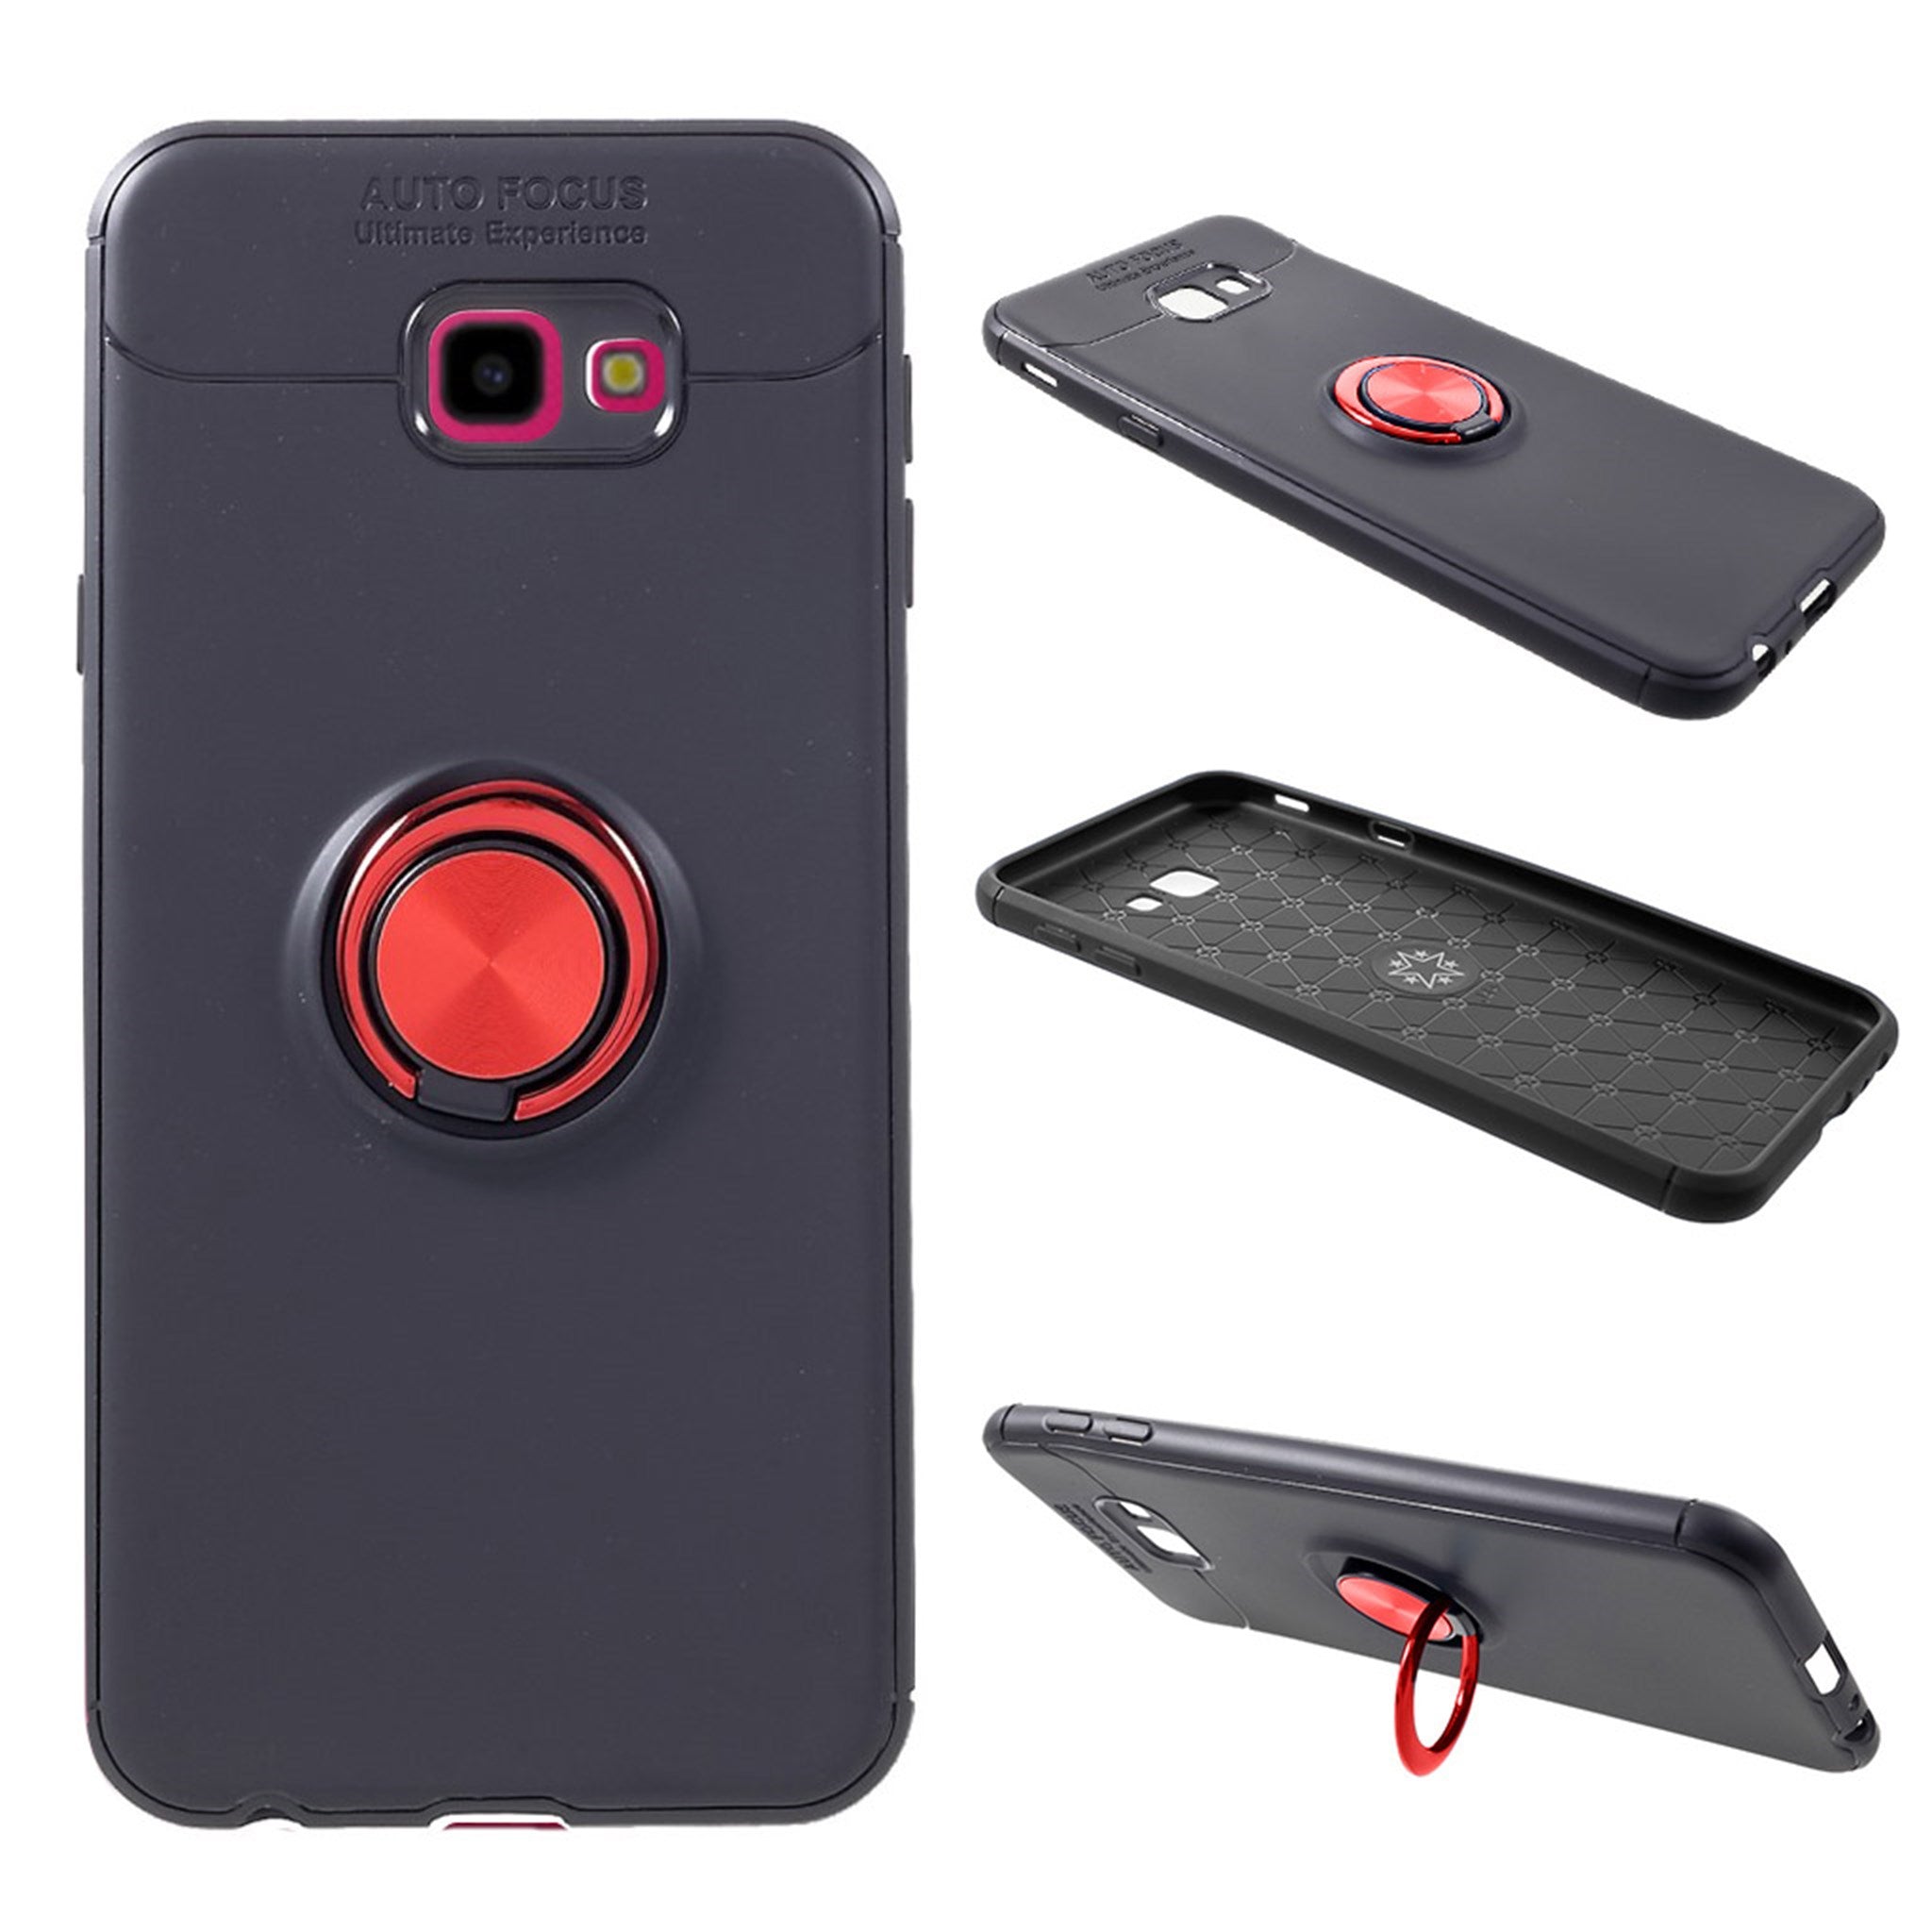 Samsung Galaxy J4 Plus (2018) kickstand case with finger ring - Black / Red